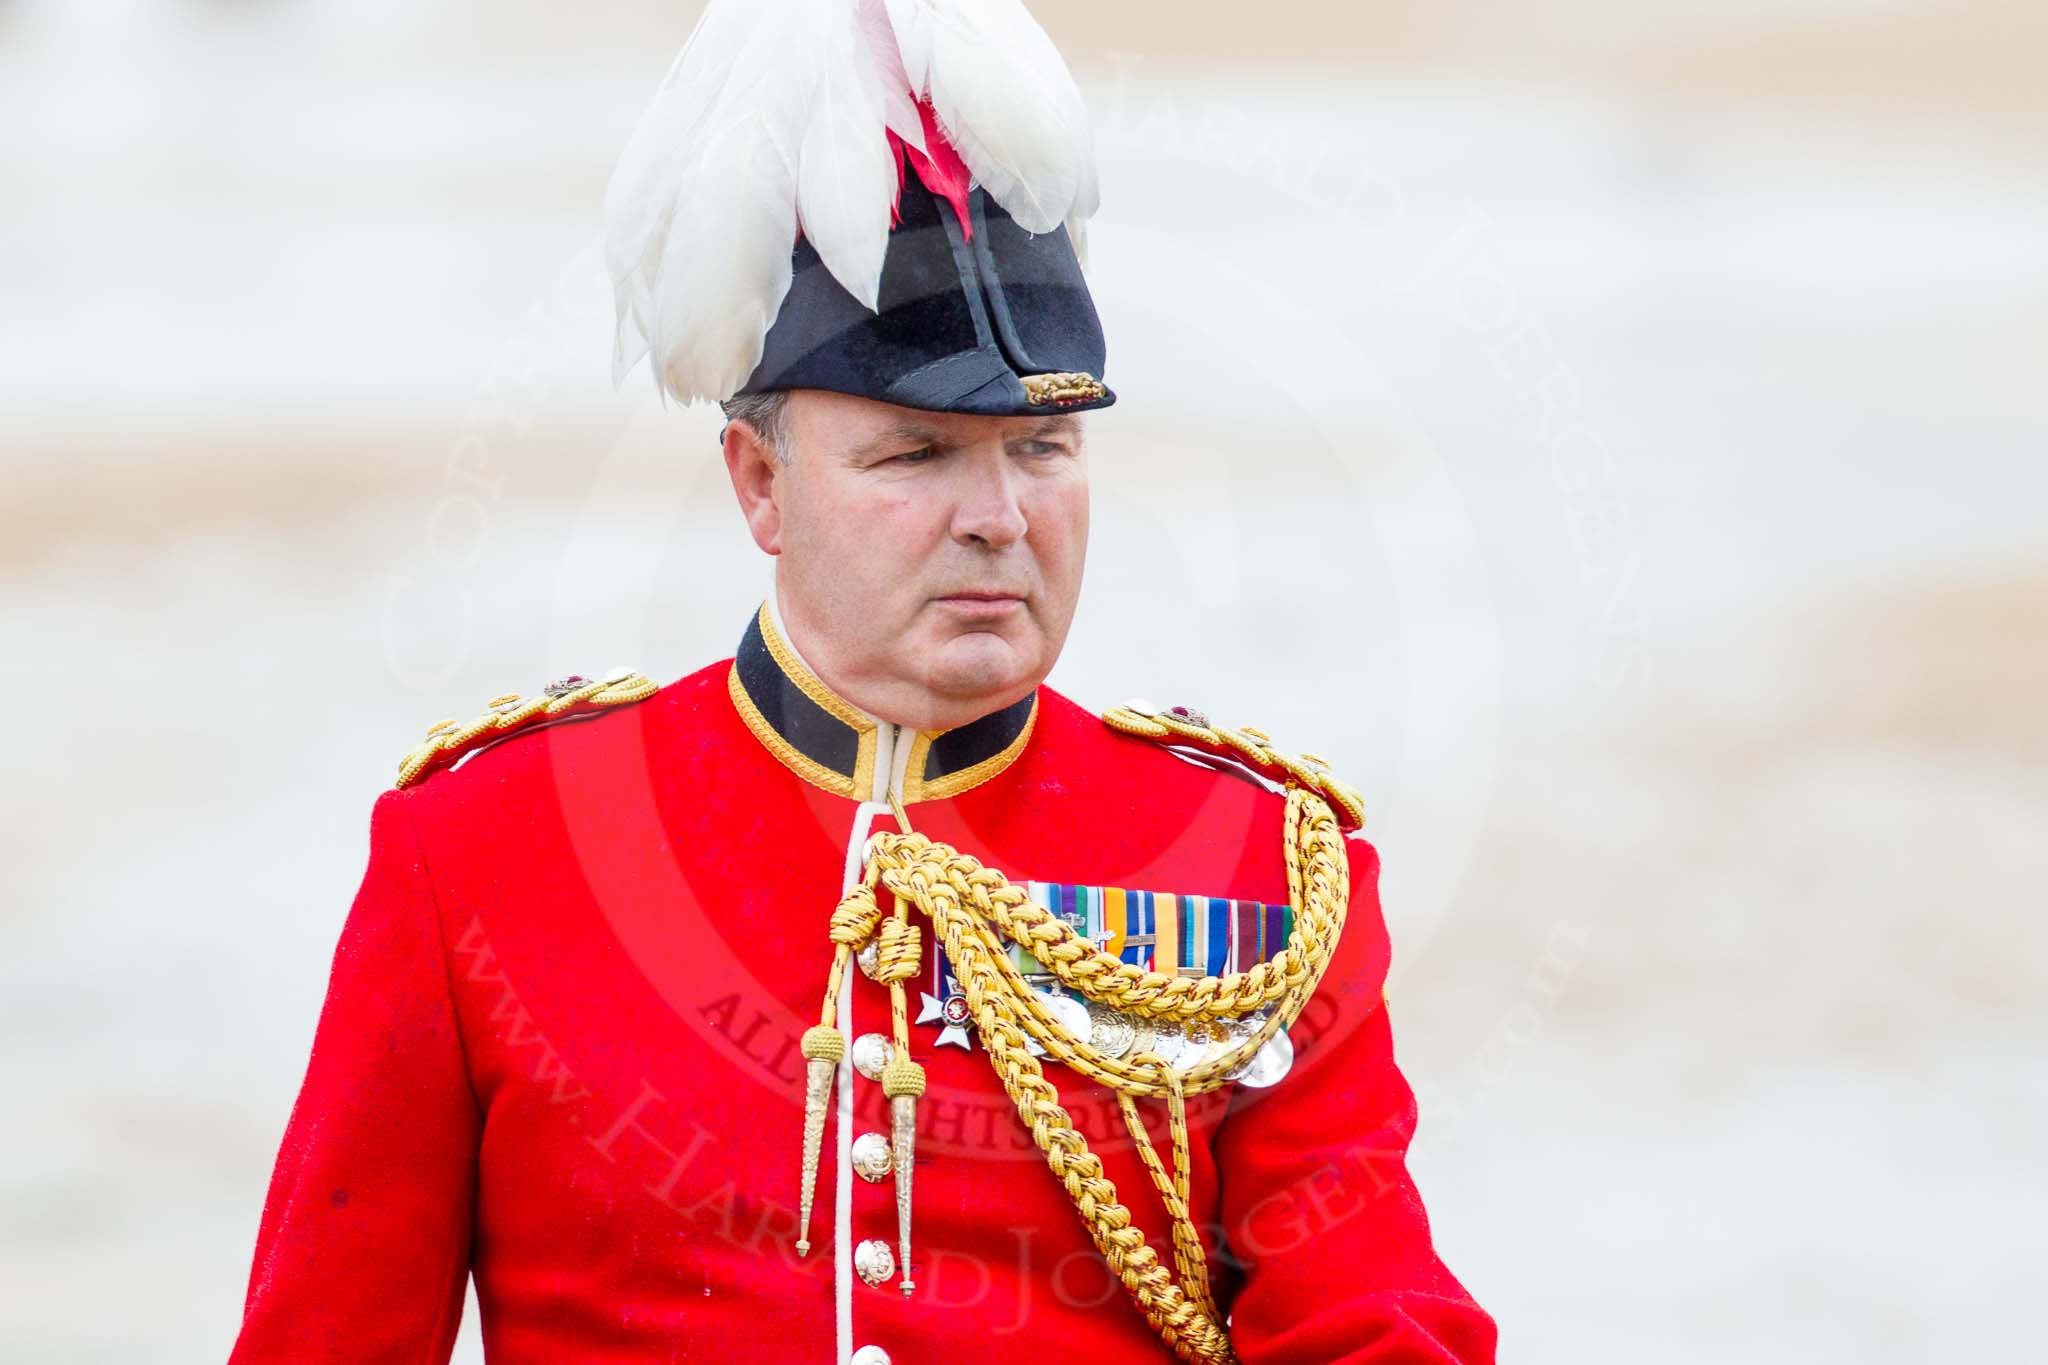 The Colonel's Review 2014.
Horse Guards Parade, Westminster,
London,

United Kingdom,
on 07 June 2014 at 11:06, image #312